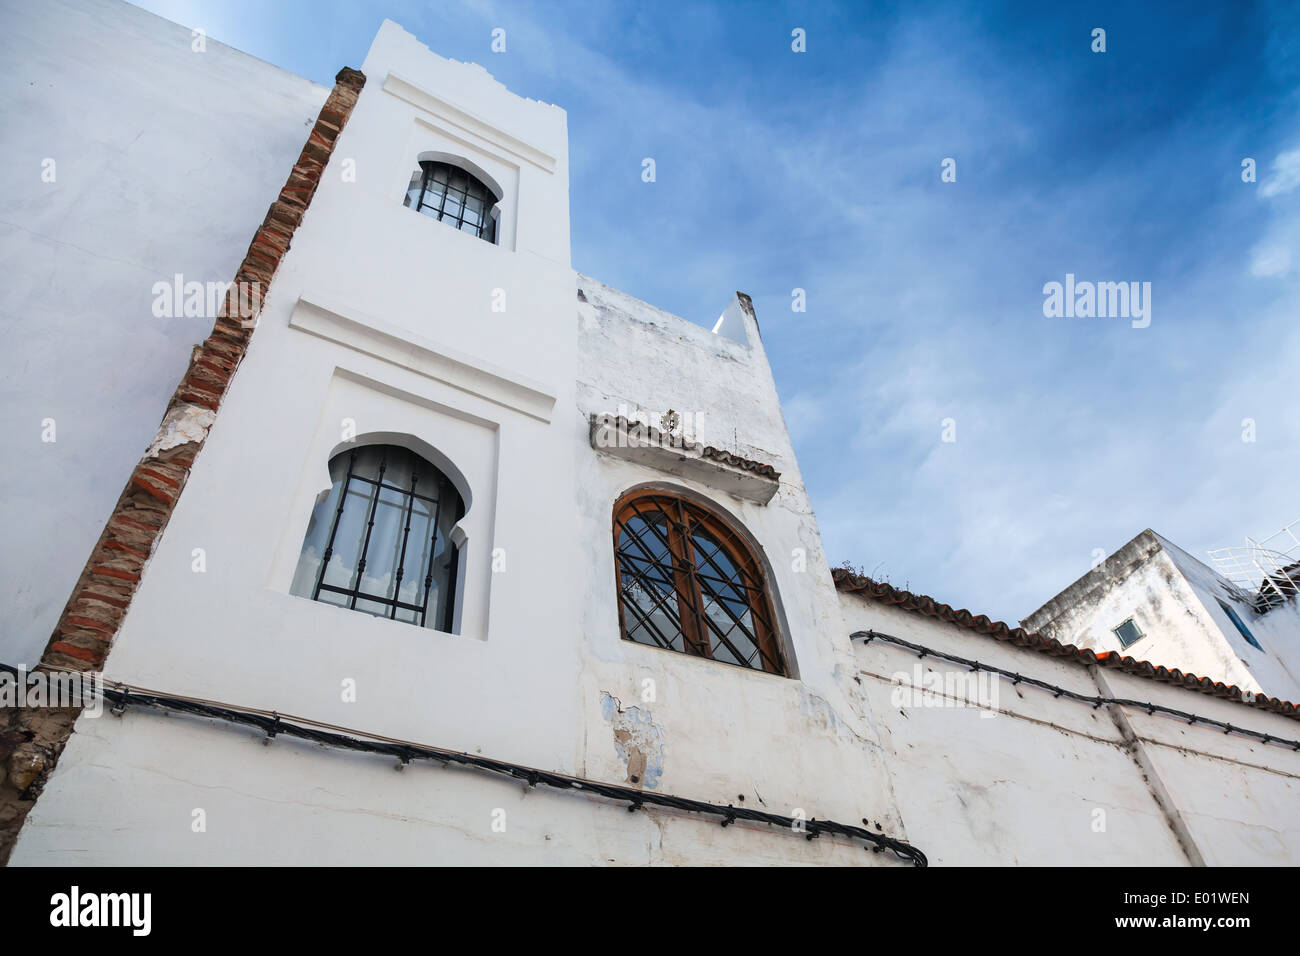 White walls, windows and blue sky. Medina, old part of Tangier, Morocco Stock Photo